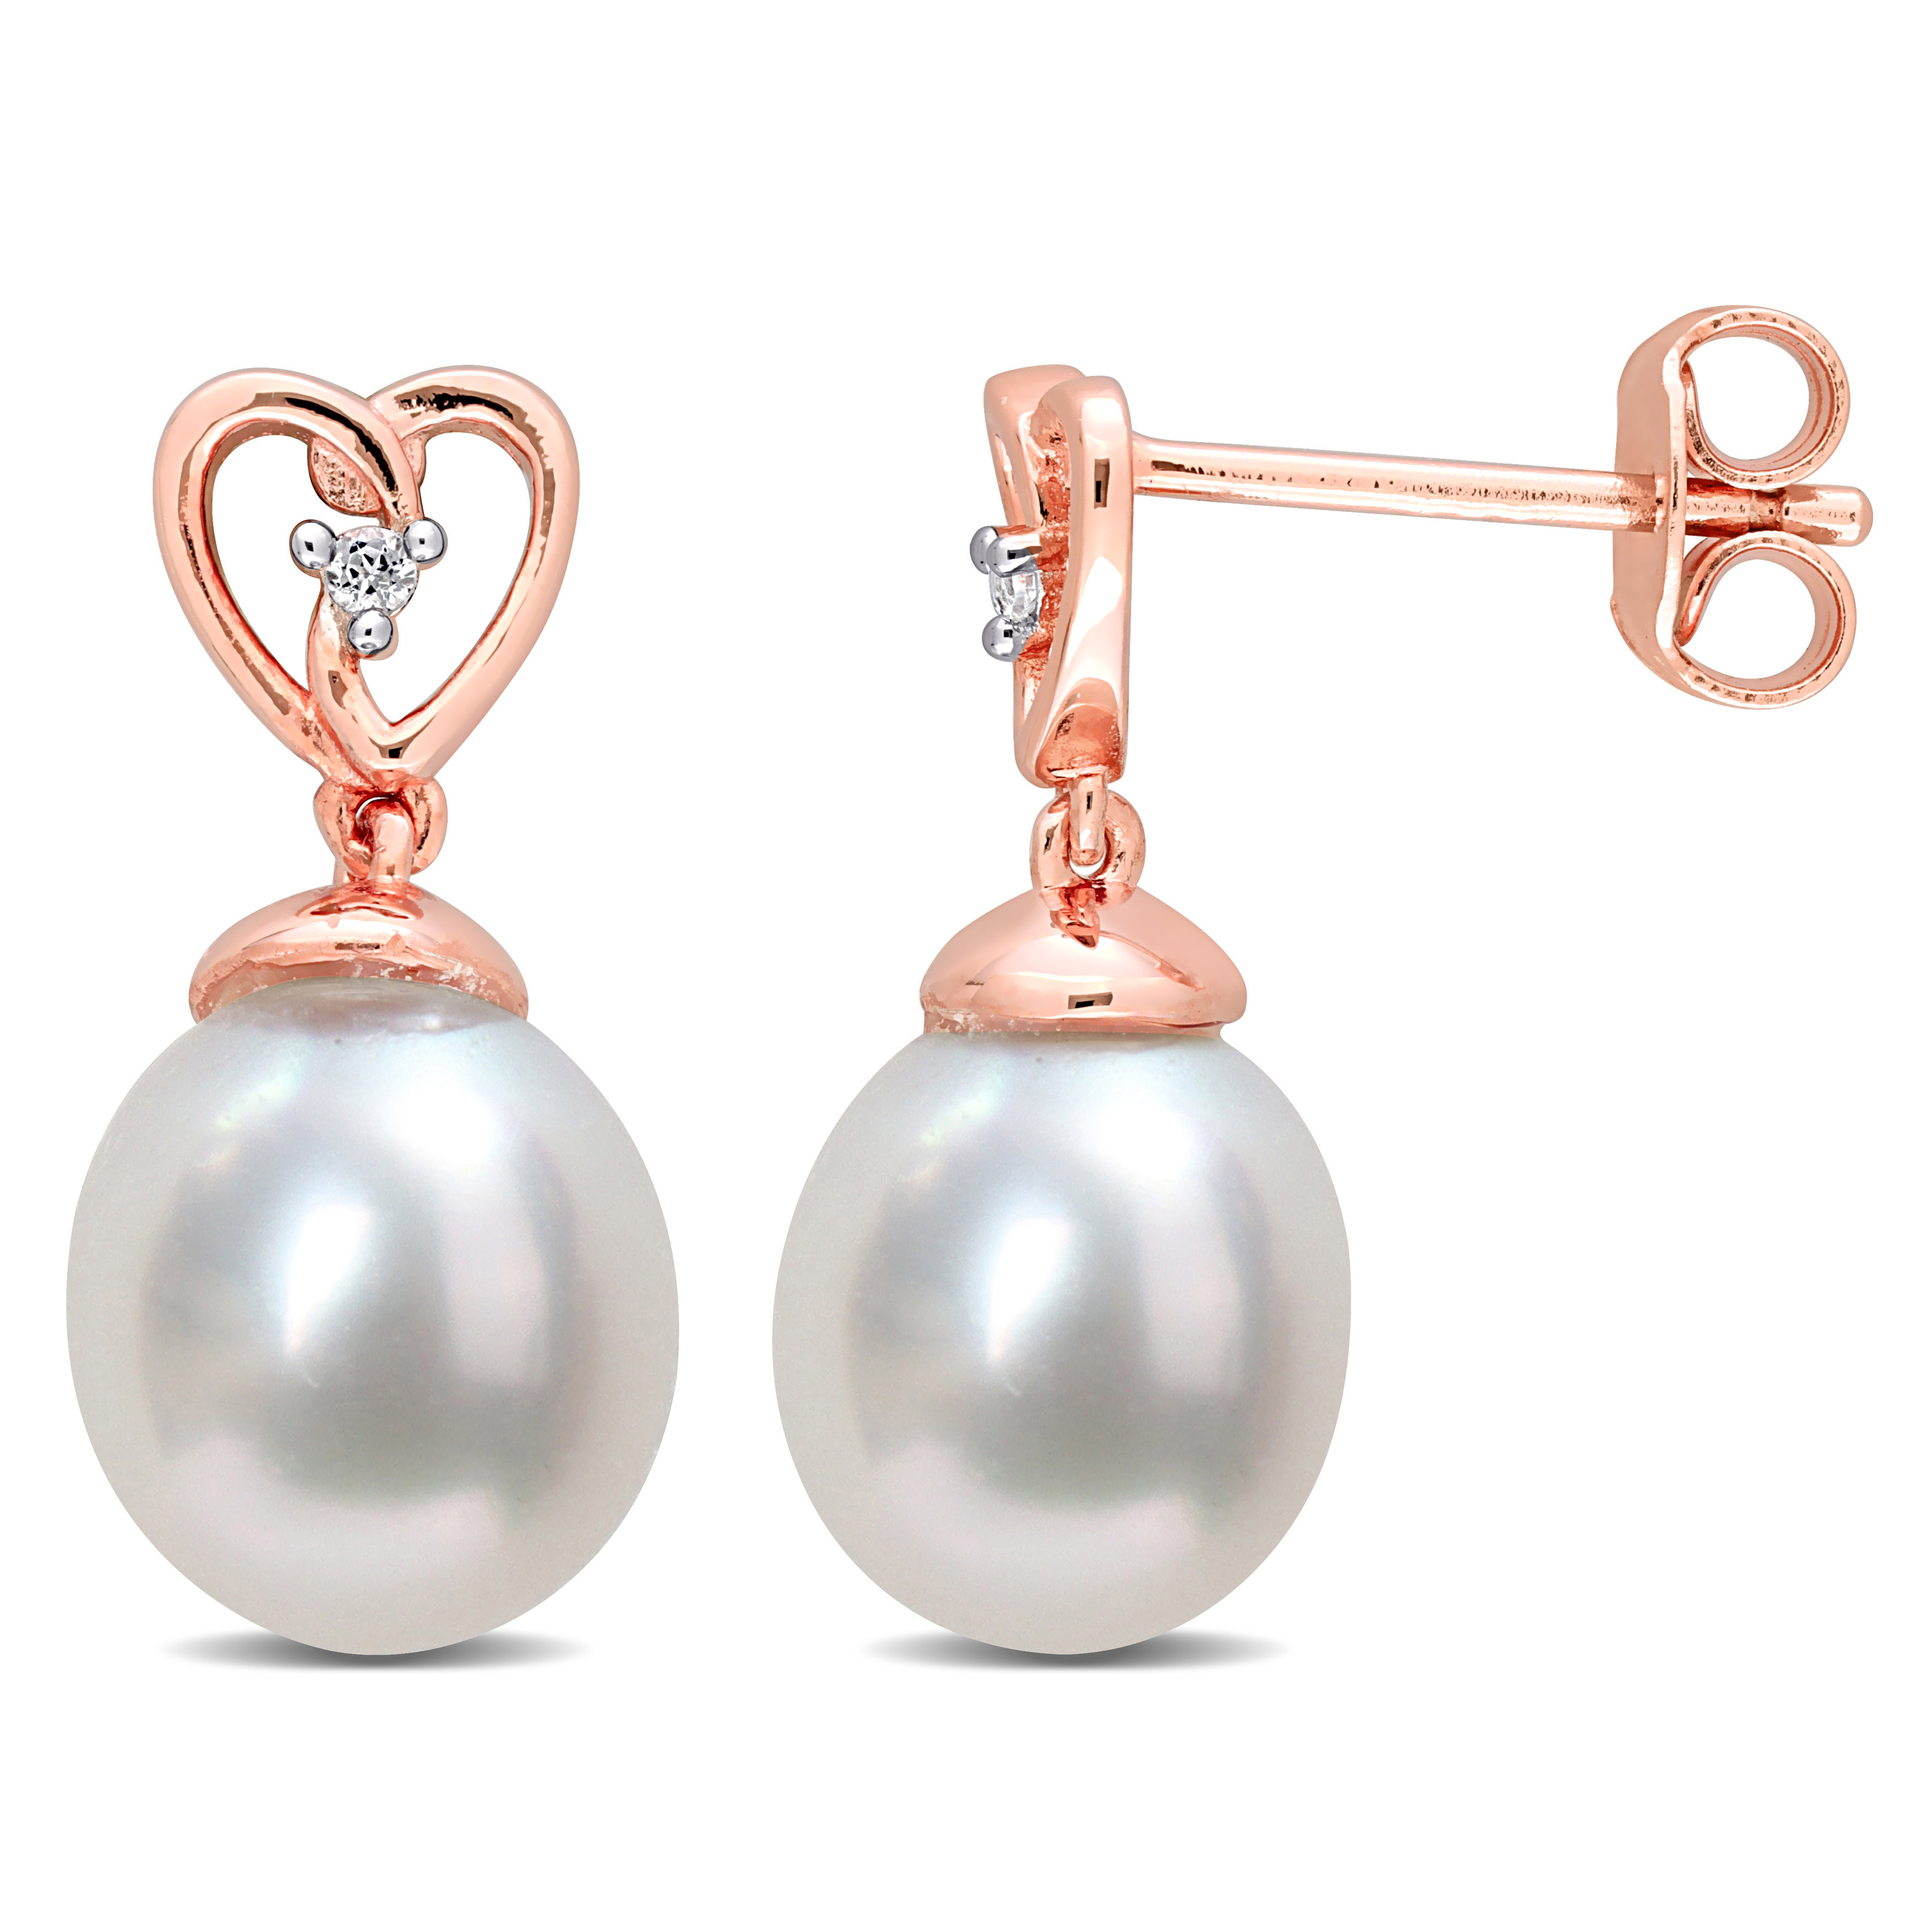 8-9 MM South Sea Cultured Pearl and White Topaz Drop Earrings in Rose Plated Sterling Silver